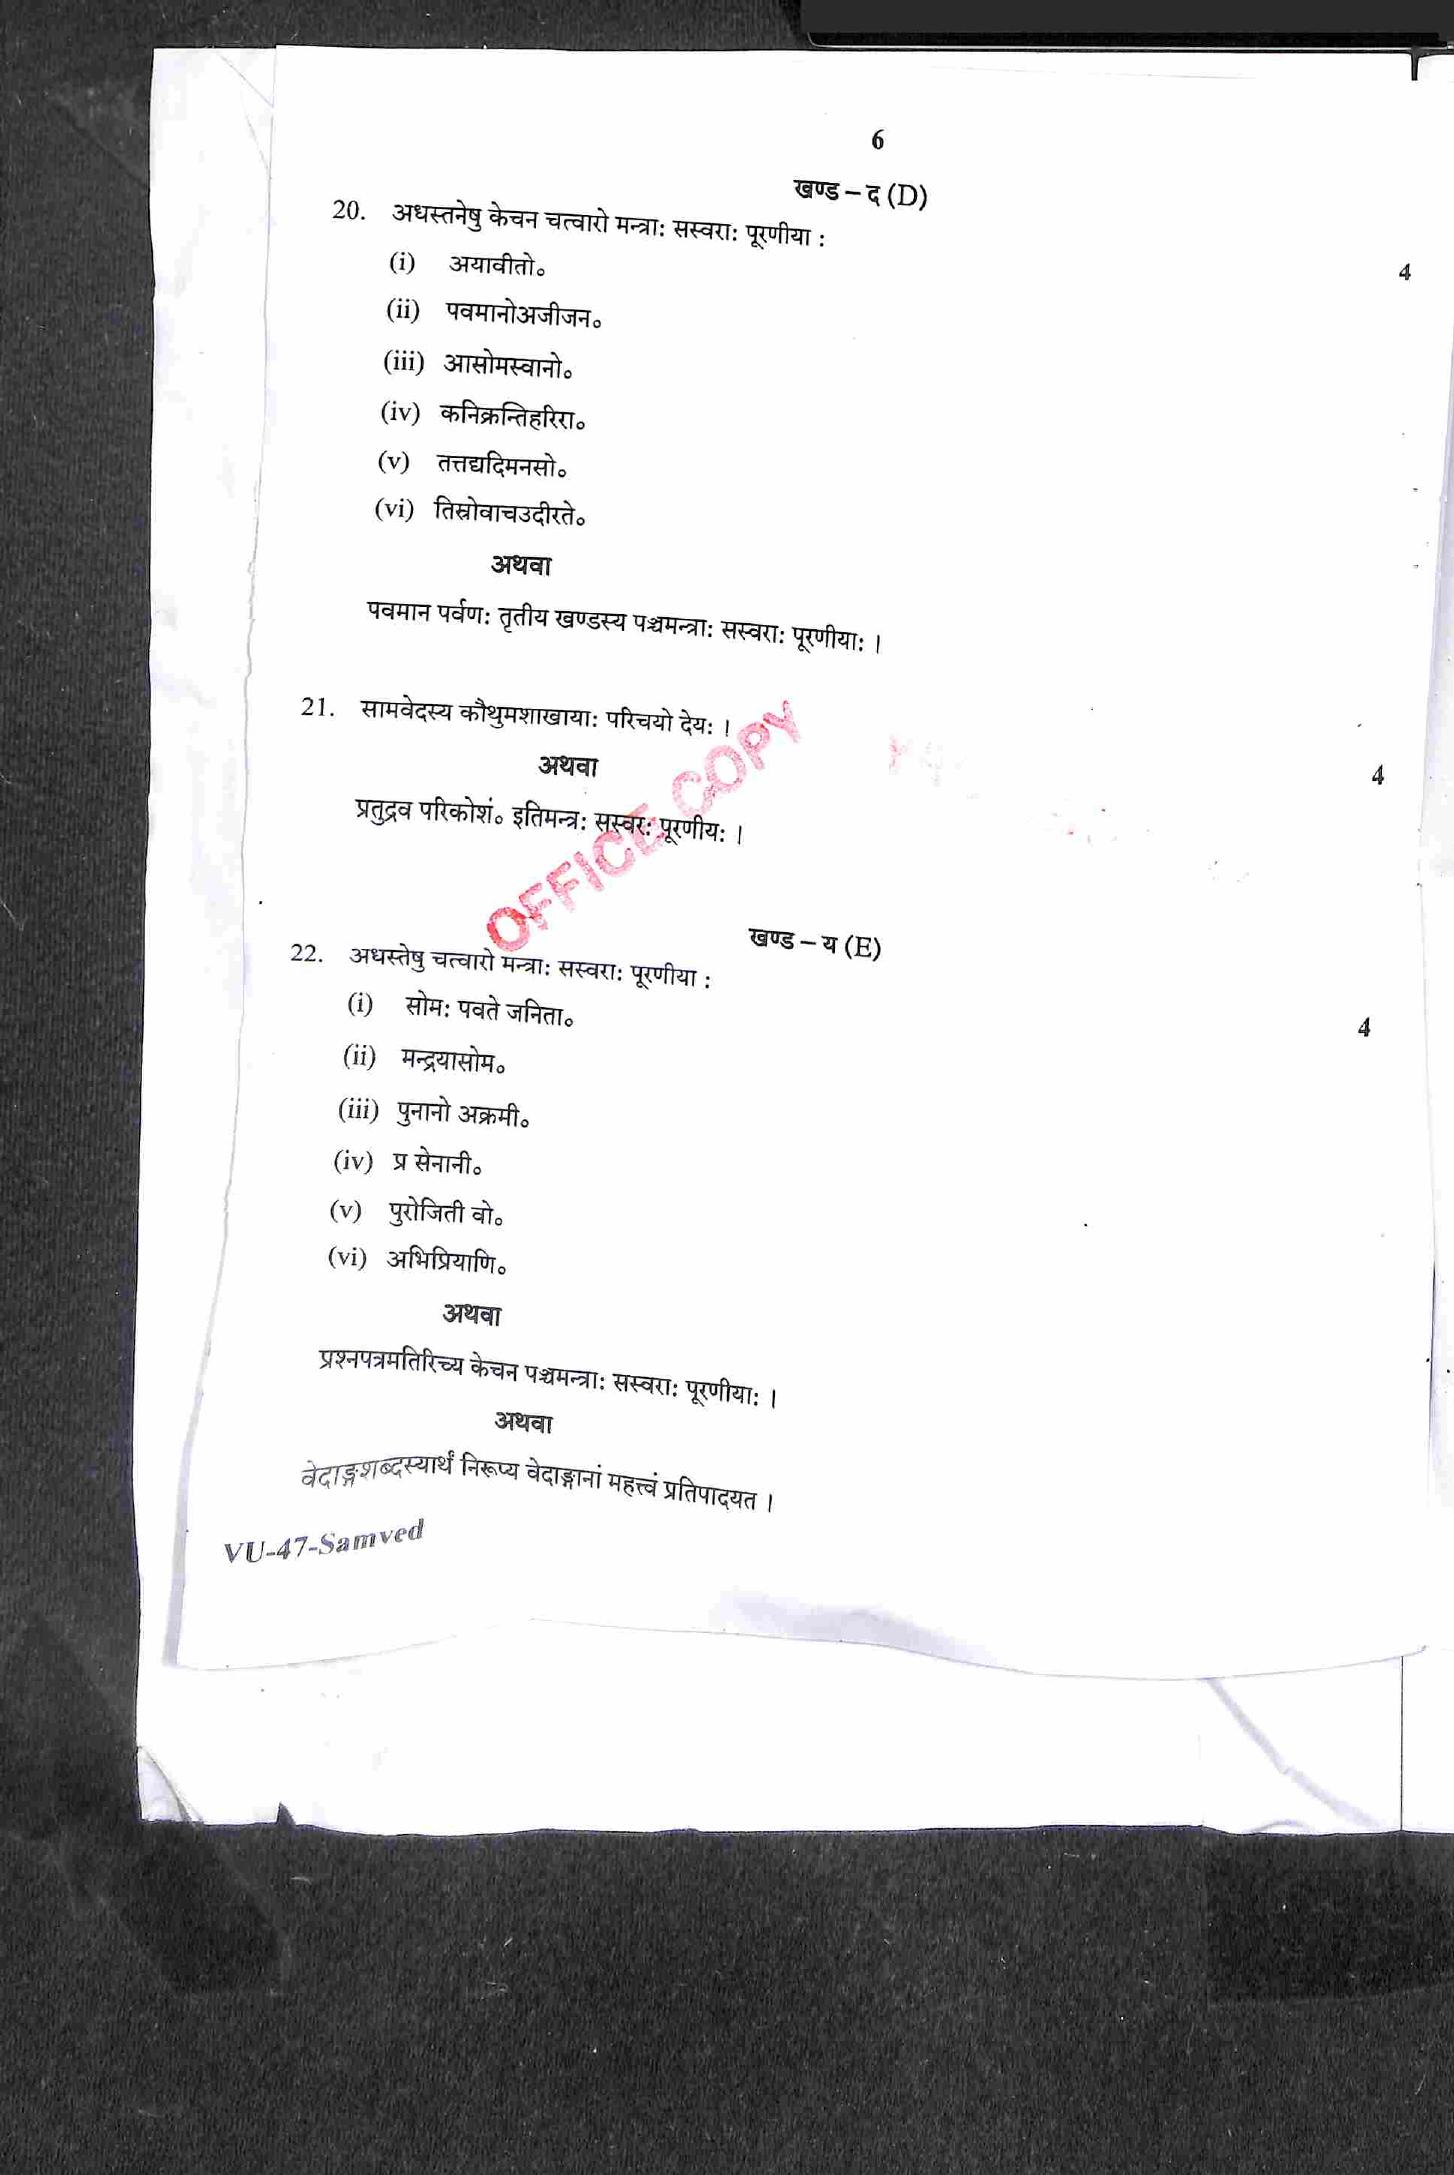 RBSE 2021 Samved Varishtha Upadhyay Question Paper - Page 7